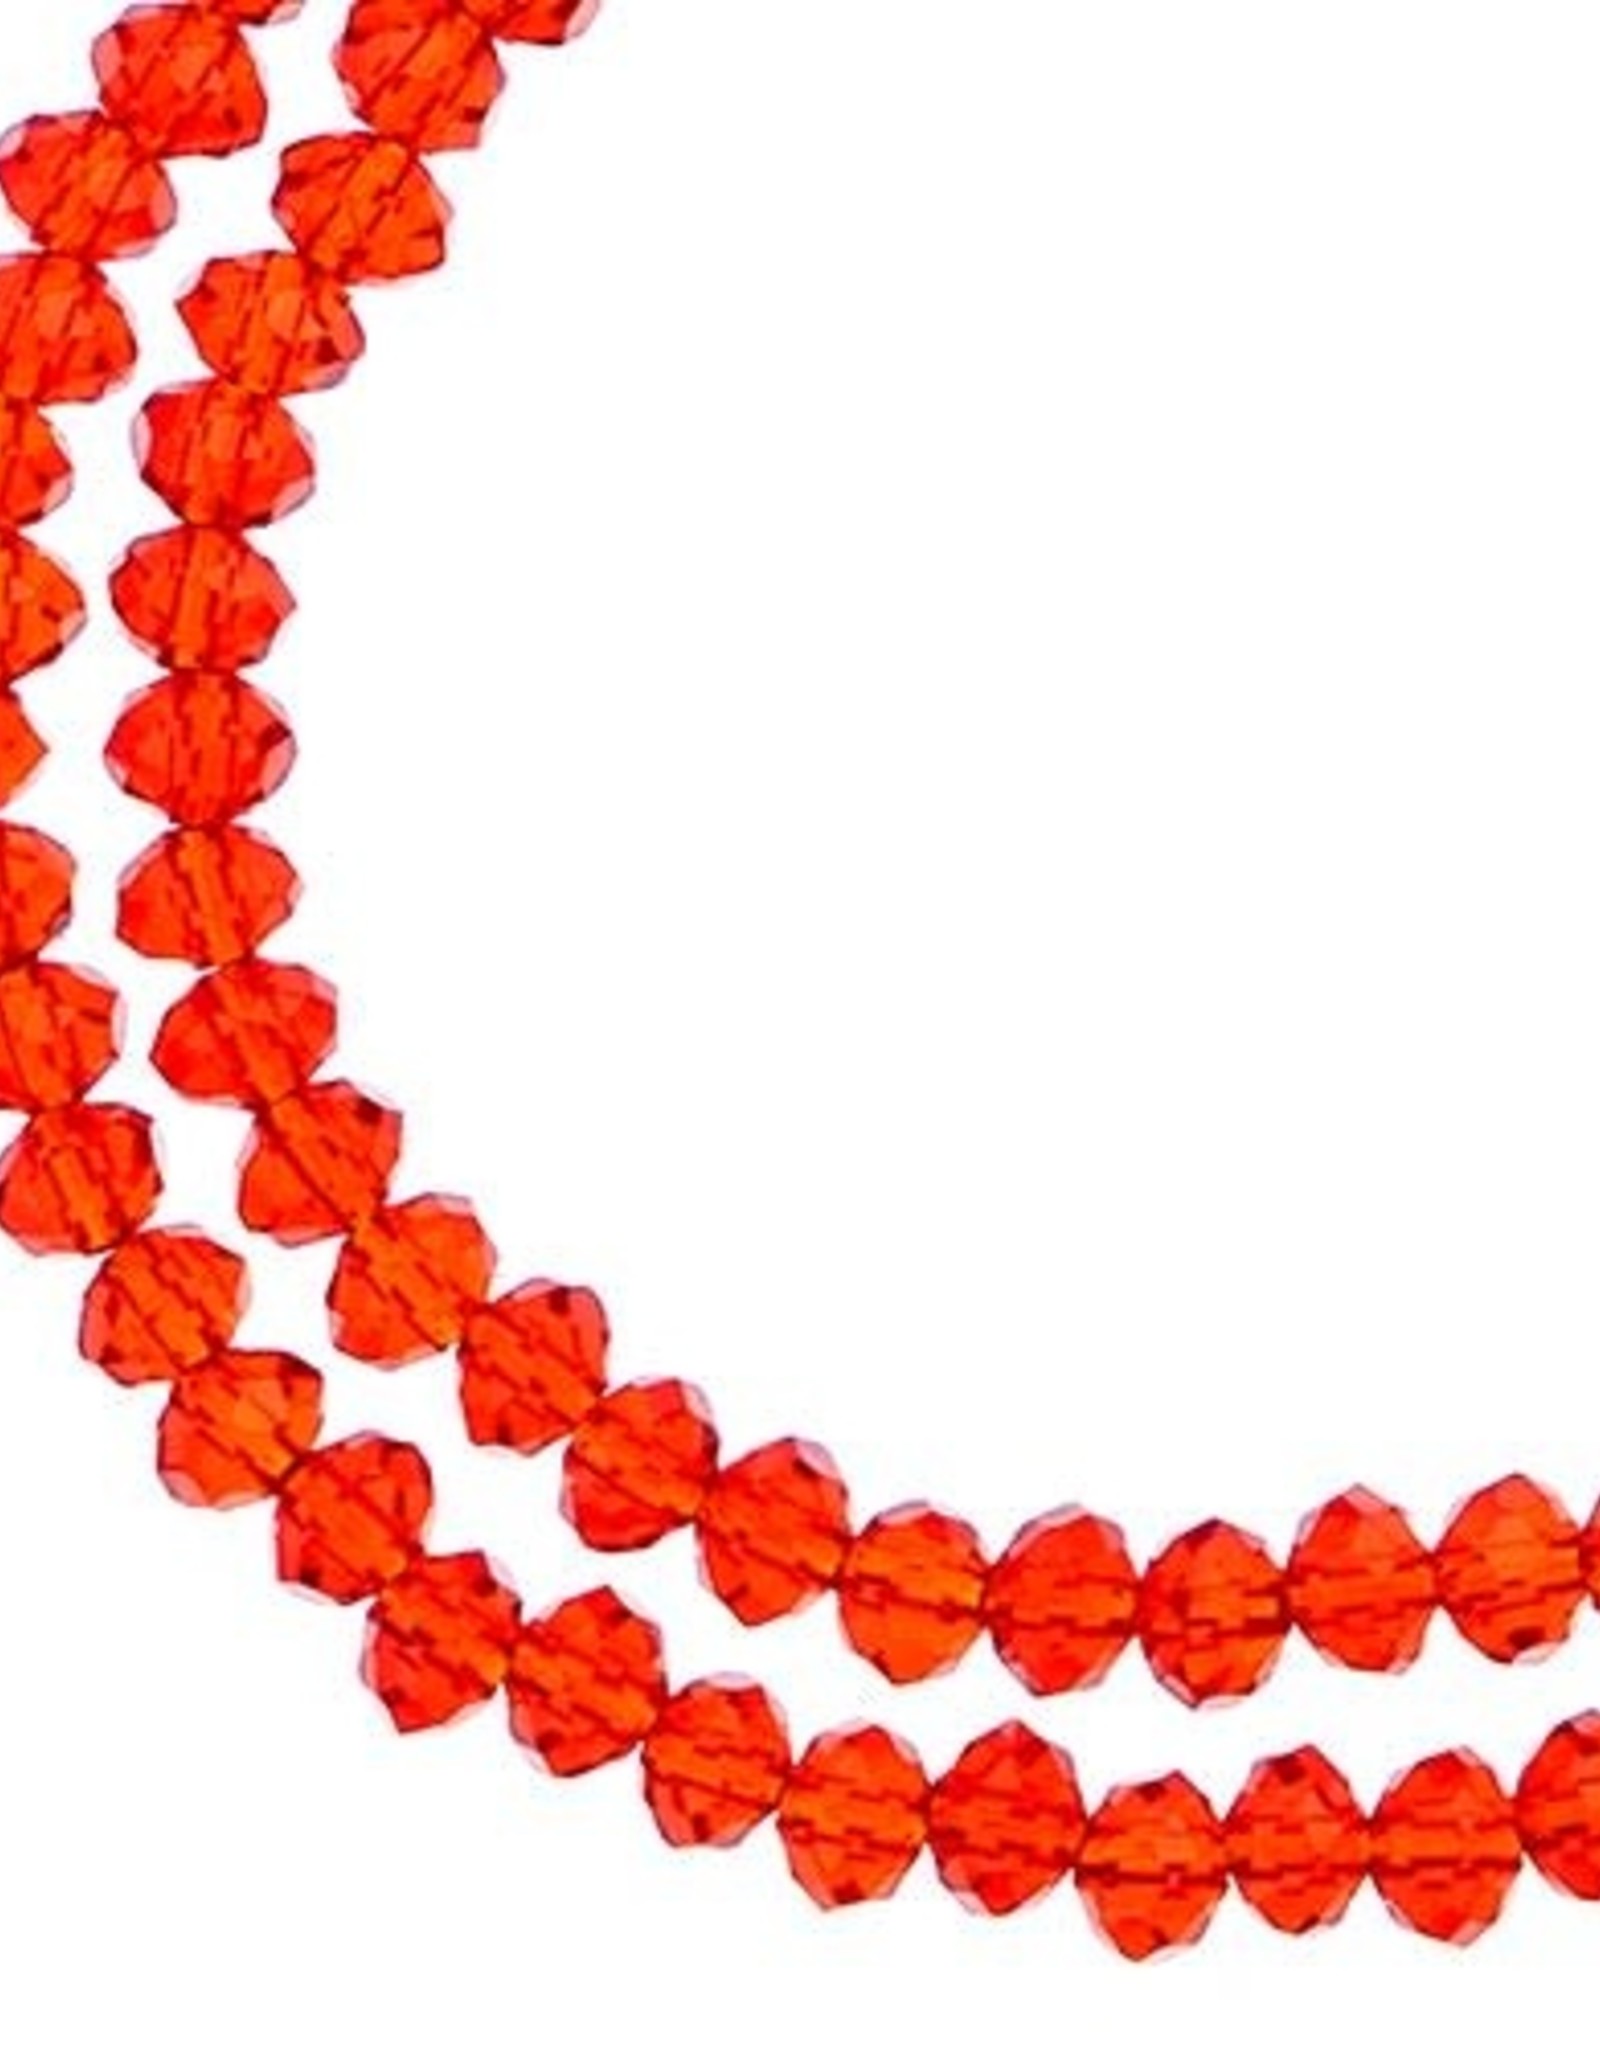 Crystal Lane Rondelle Crystal Lane Rondelle 2Strand 7in (apx110pcs) Transparent Red 90102-16